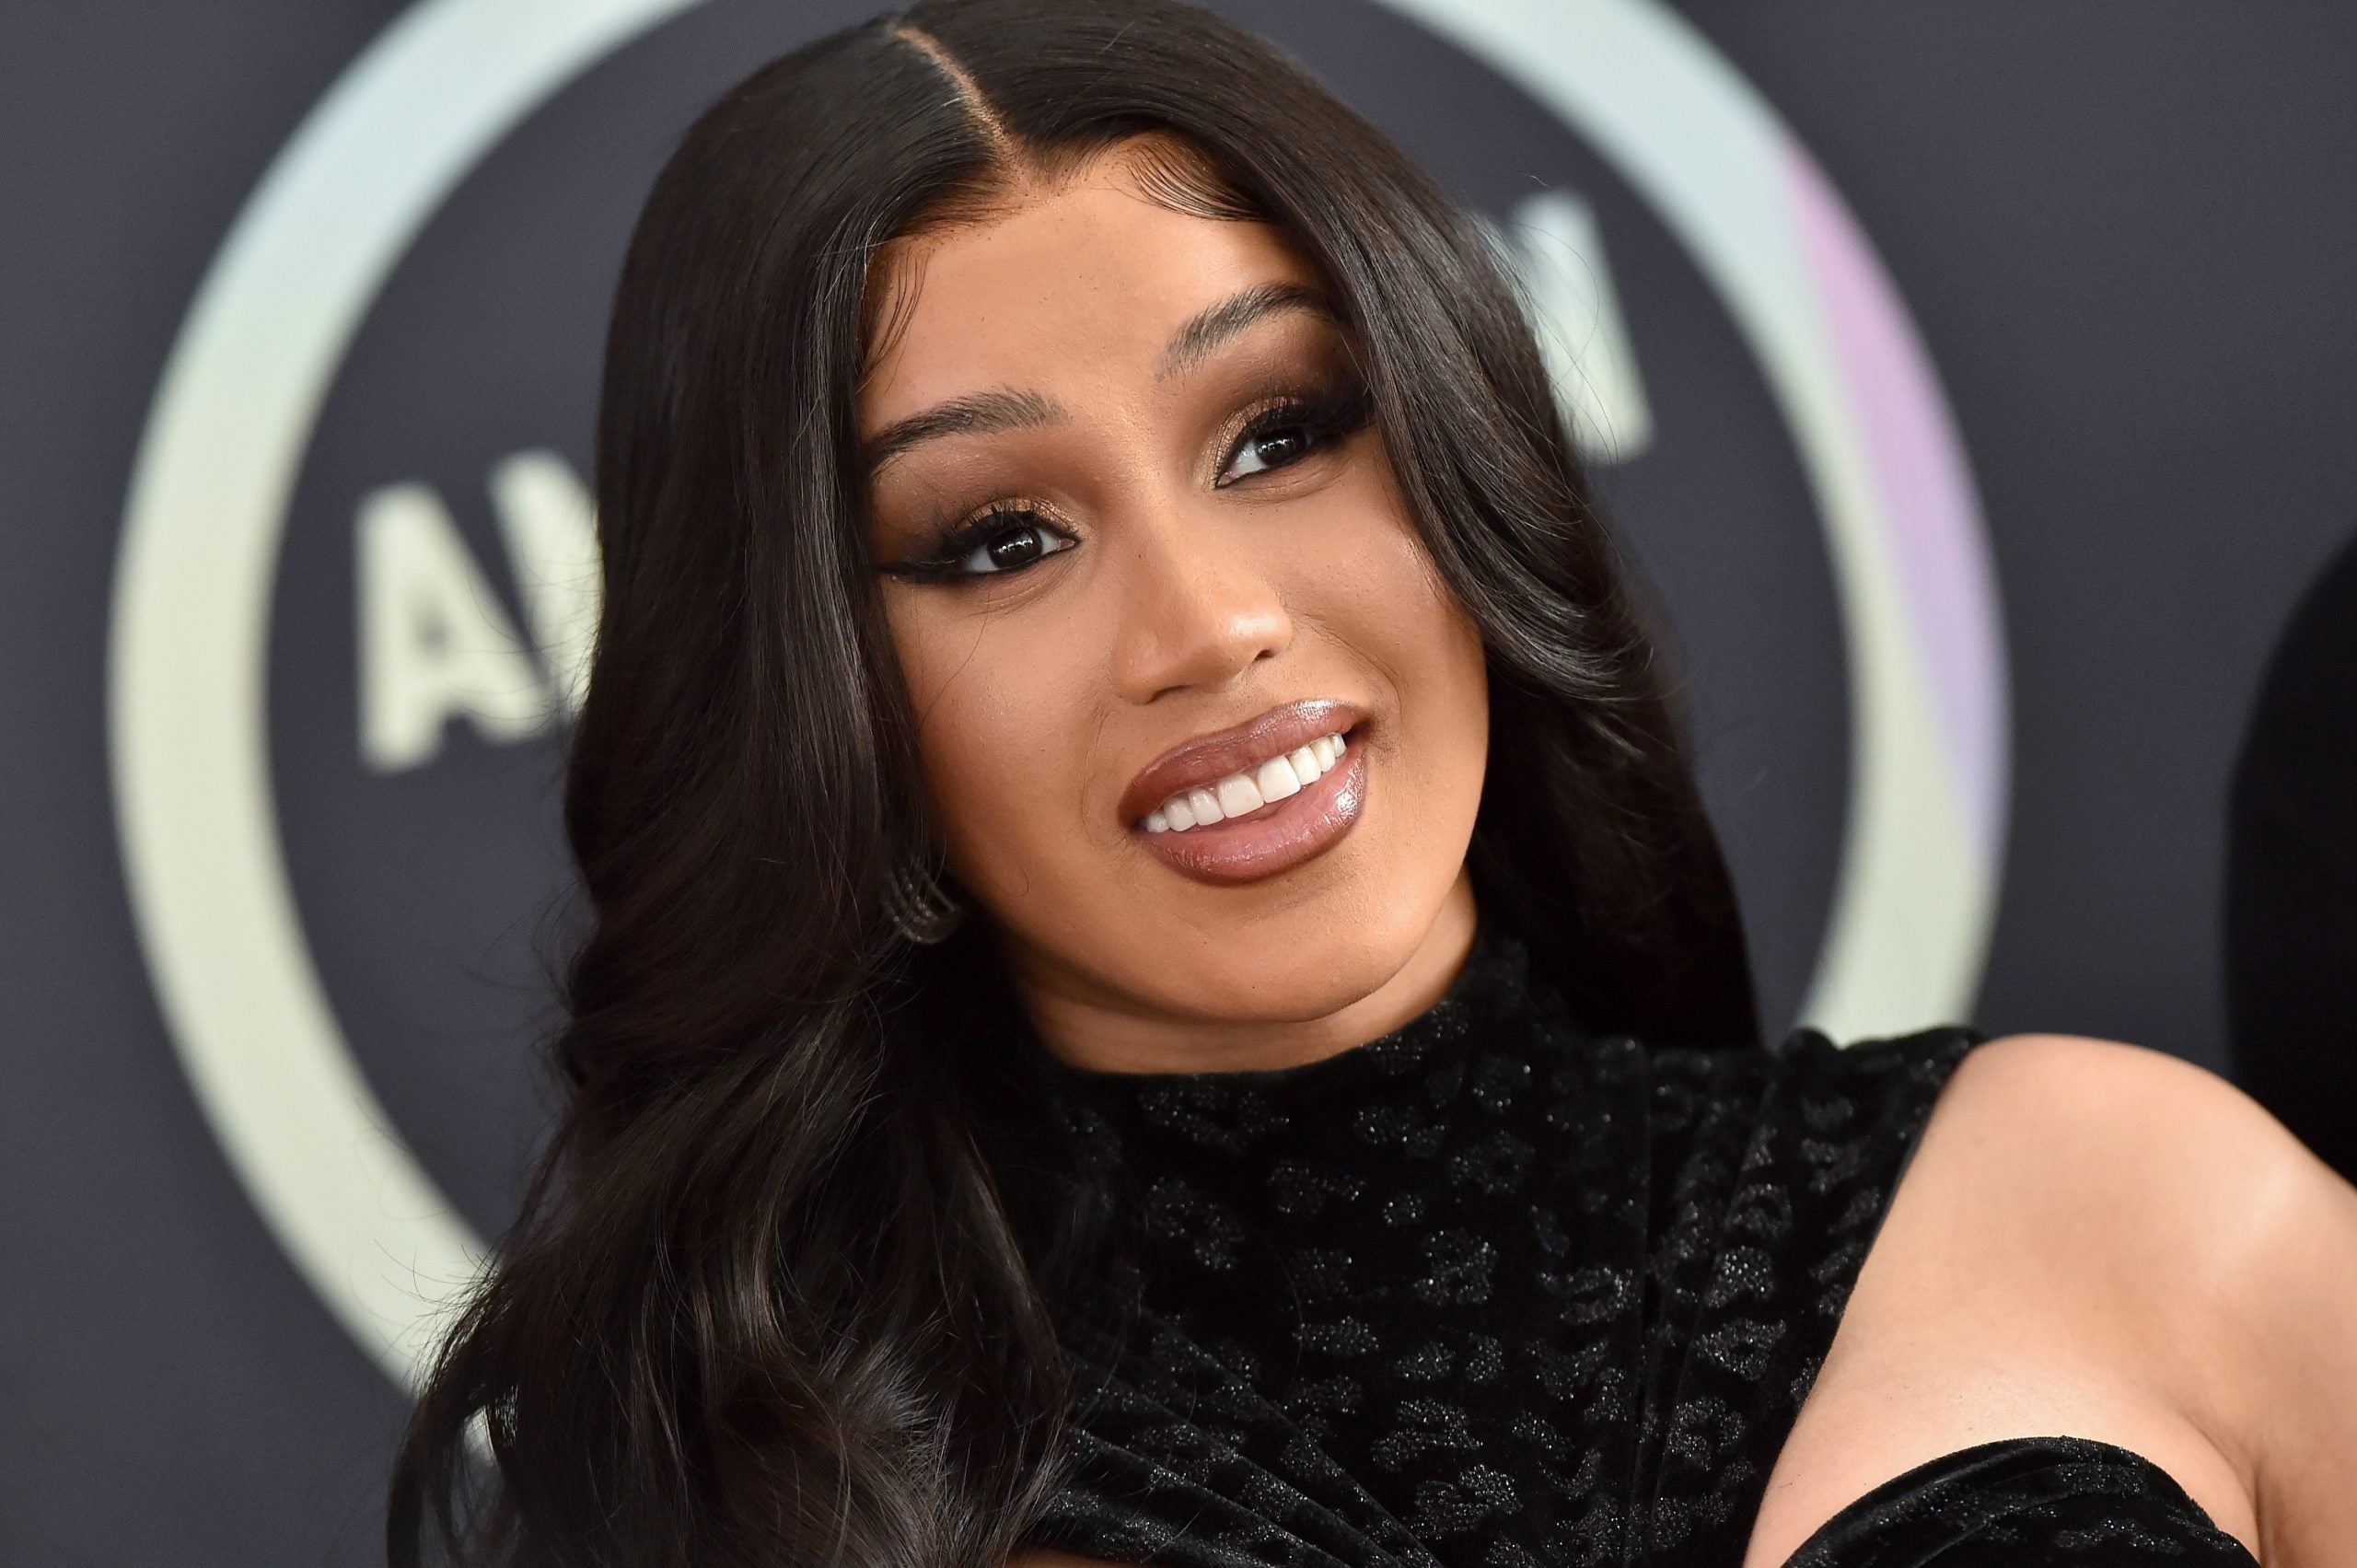 Cardi B Talks Life, Her Career And Politics With David Letterman On ‘My Next Guest Needs No Introduction’